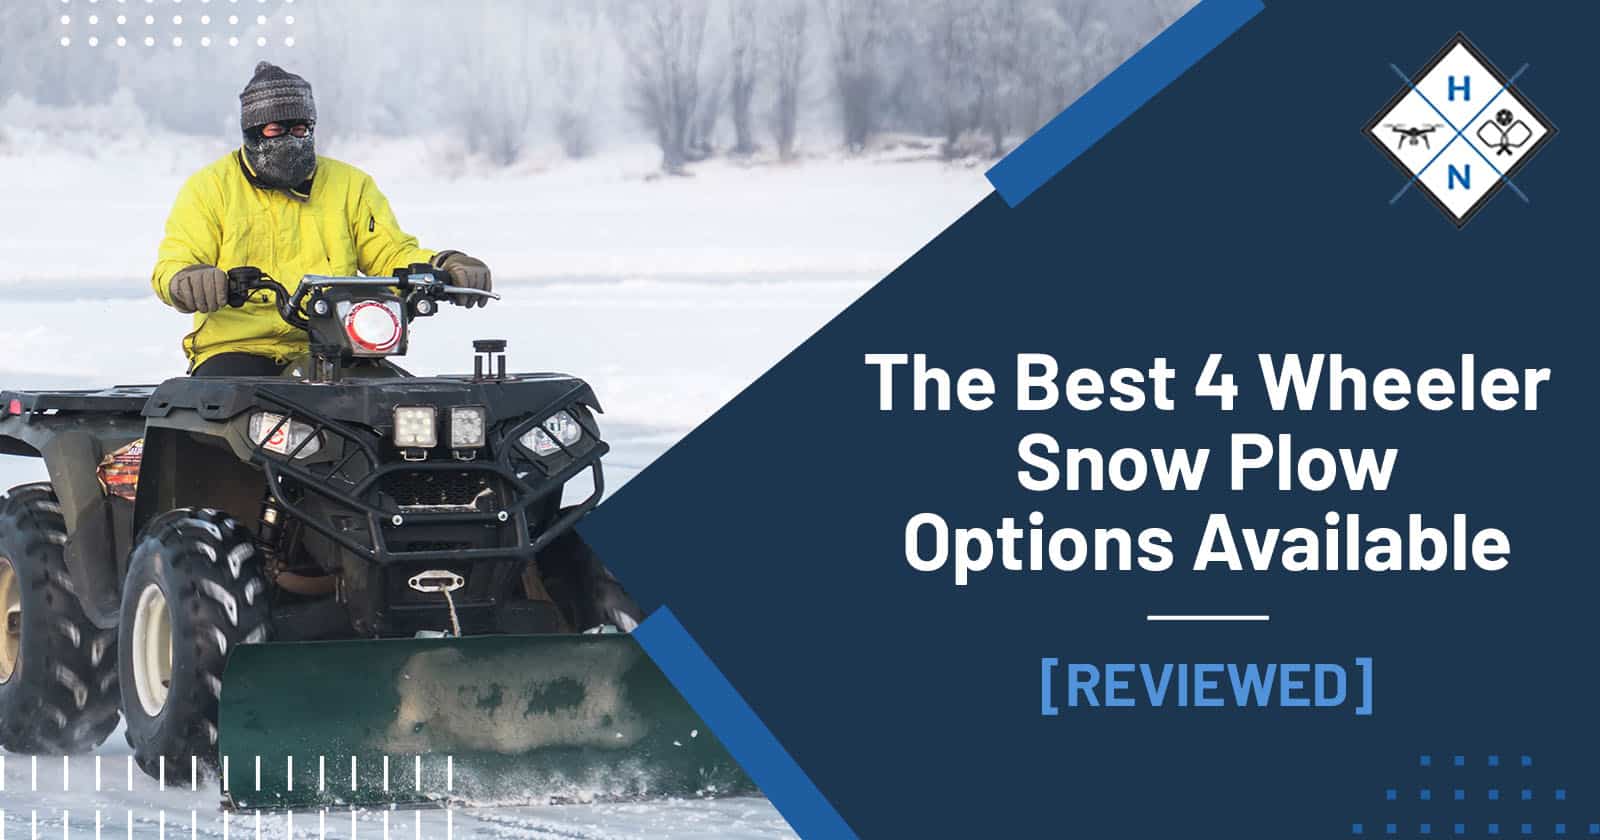 The Best 4-Wheeler Snow Plow Options Available [REVIEWED]